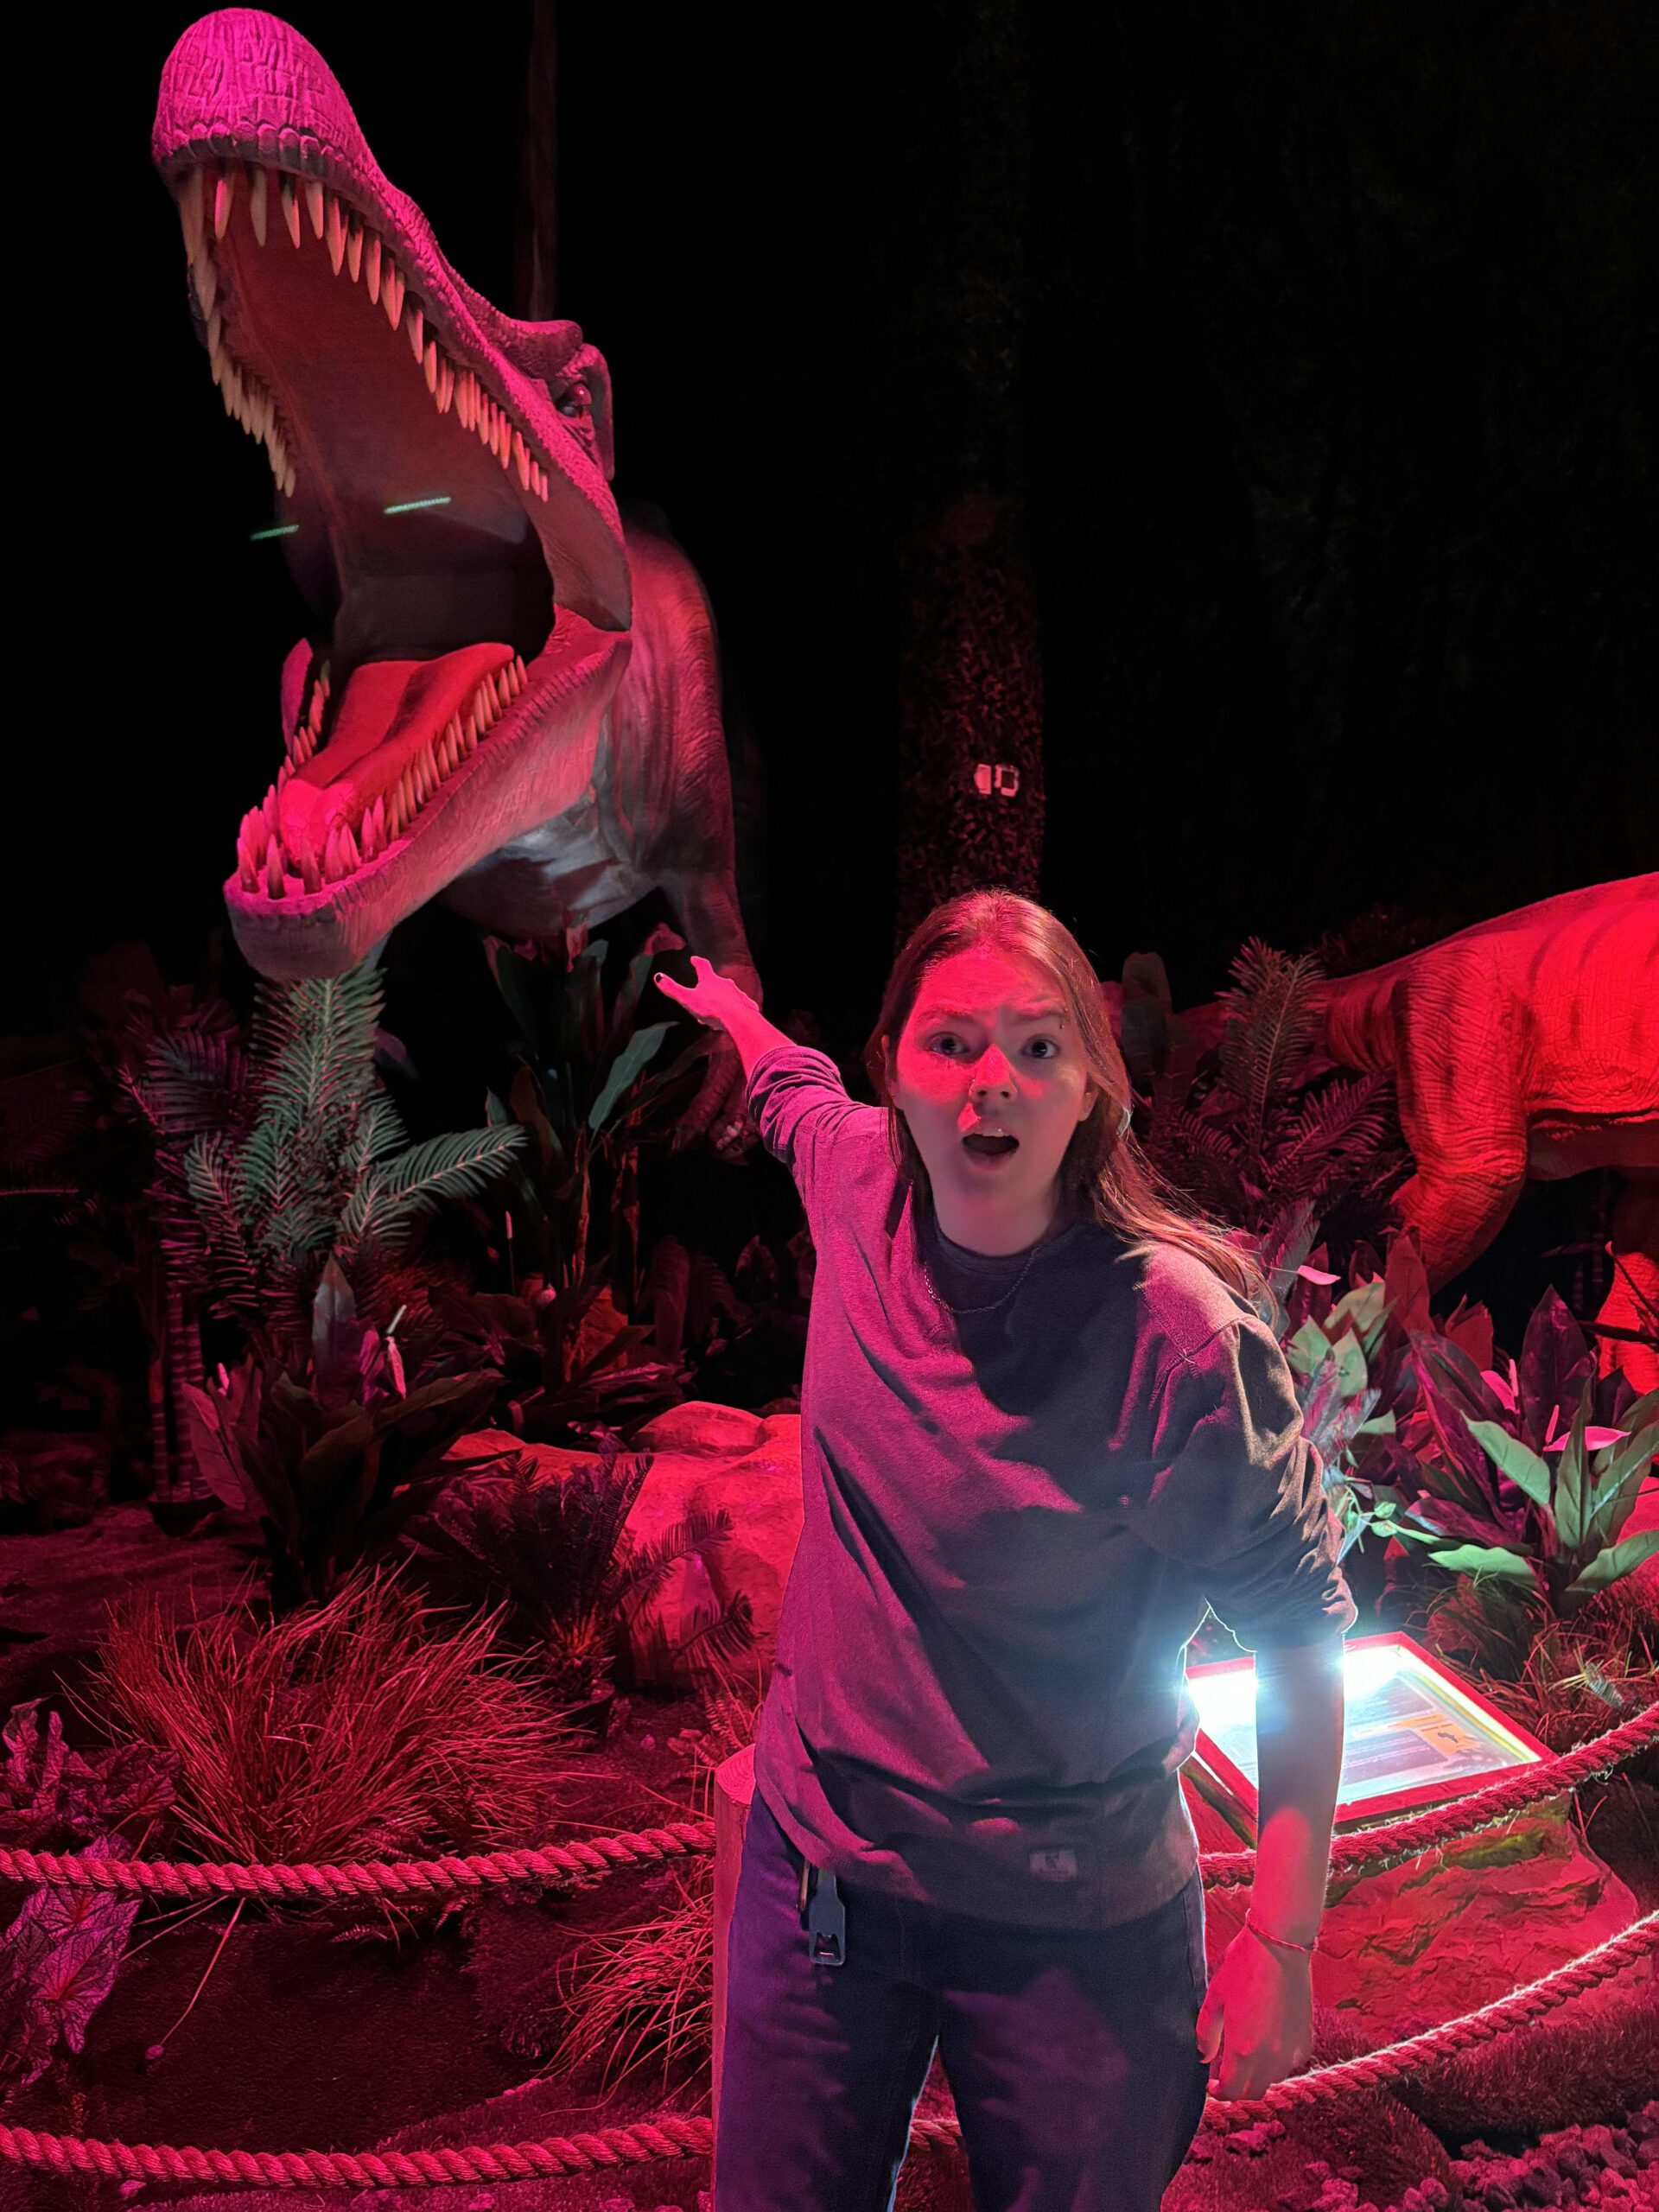 Sarah Scrimble pointing backward toward a fierce T-rex with his mouth open.